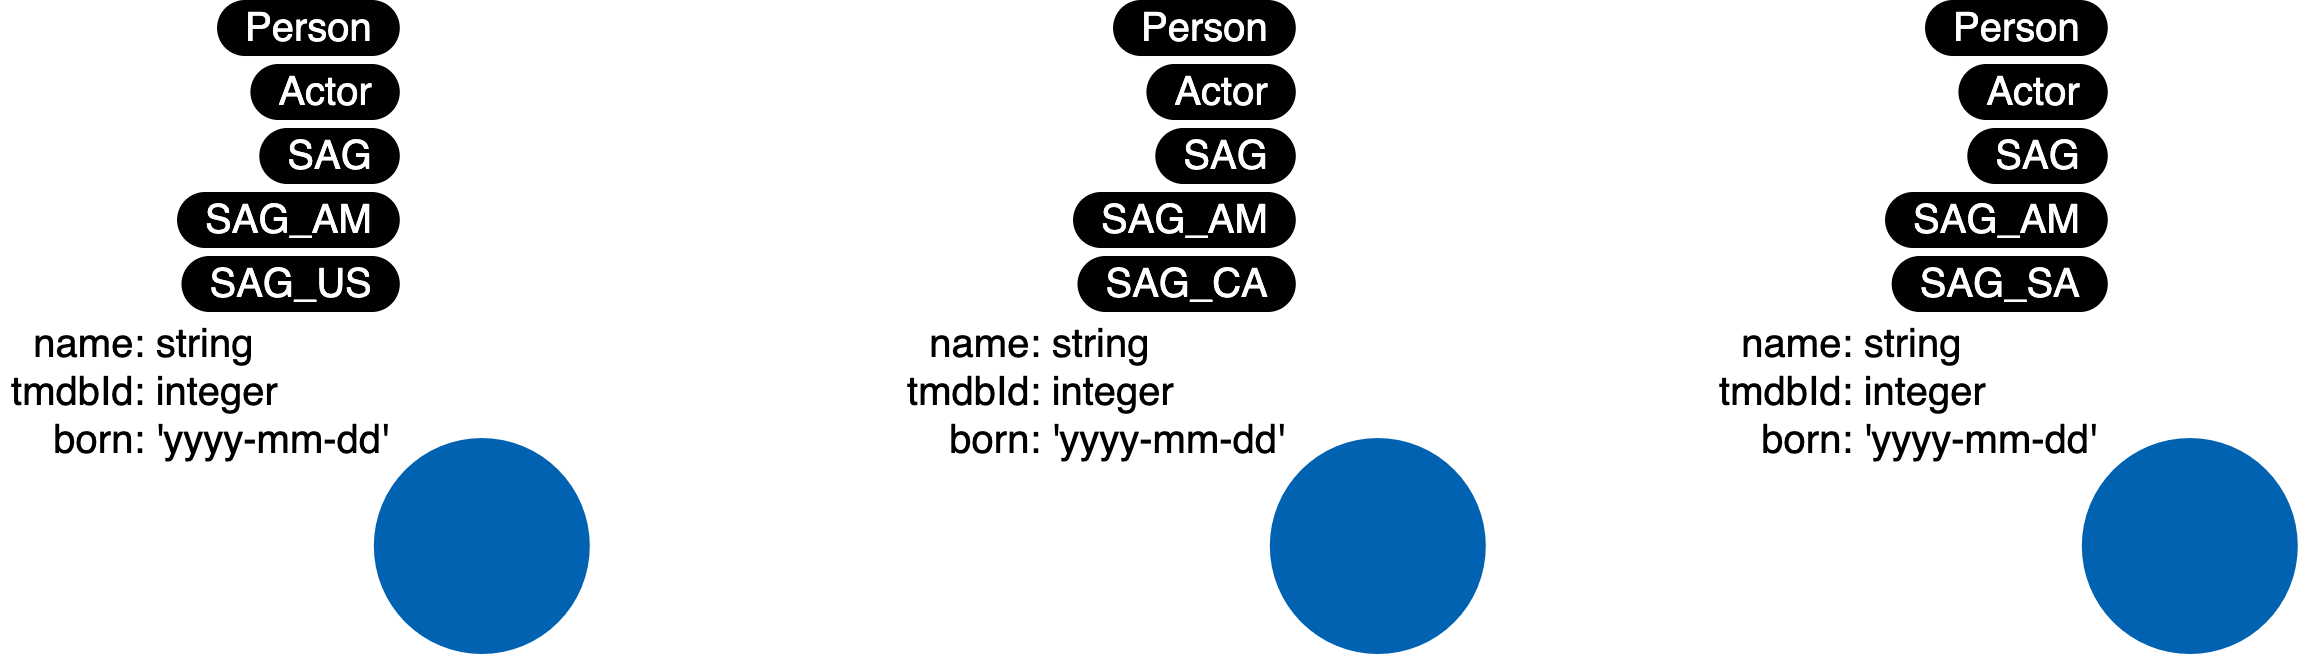 Hierarchy of labels